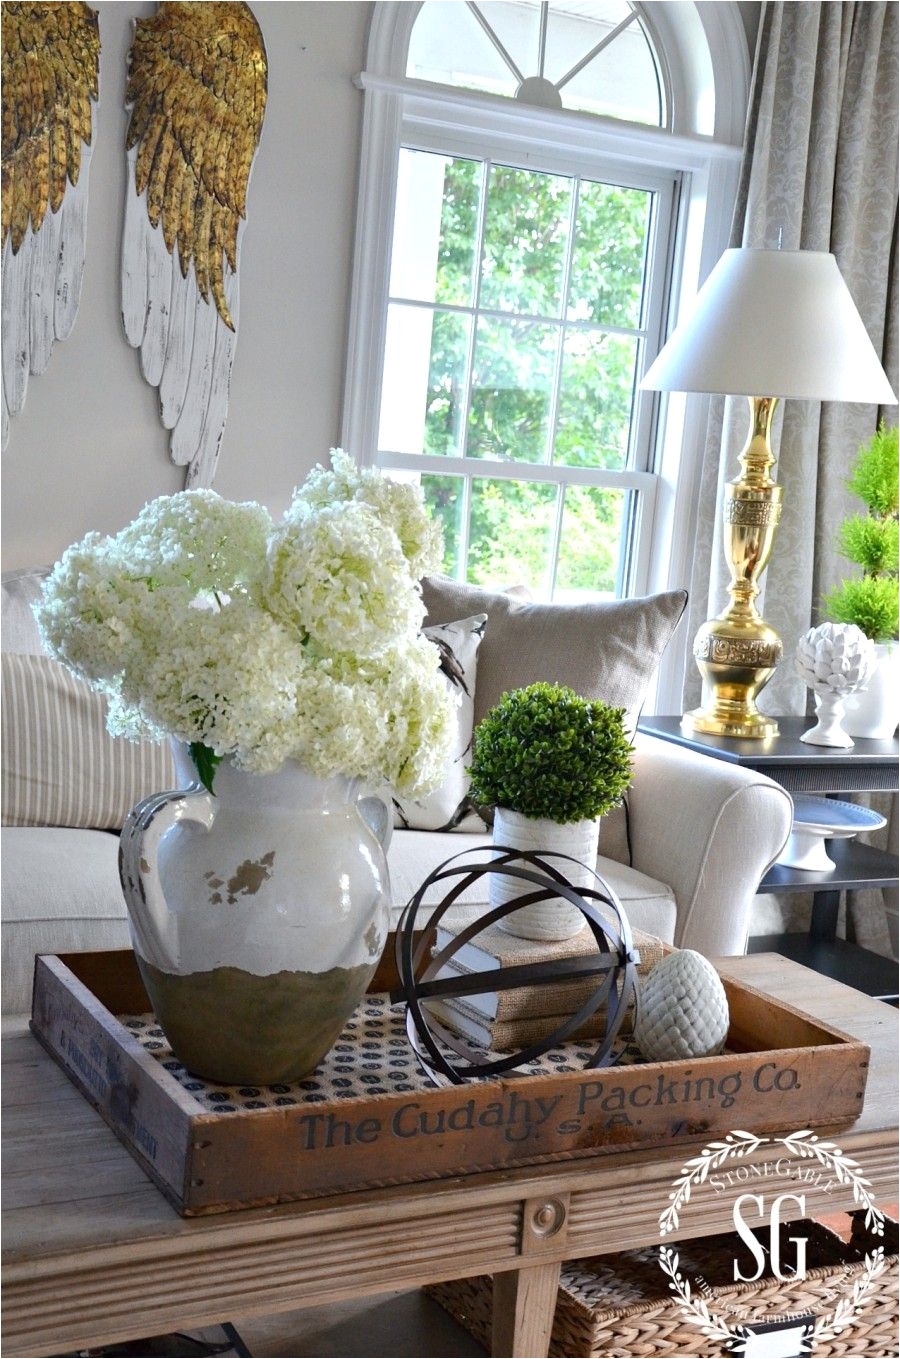 i love the idea of putting the coffee table decor on a wooden tray looks great and makes it easy to move out of the way when needed